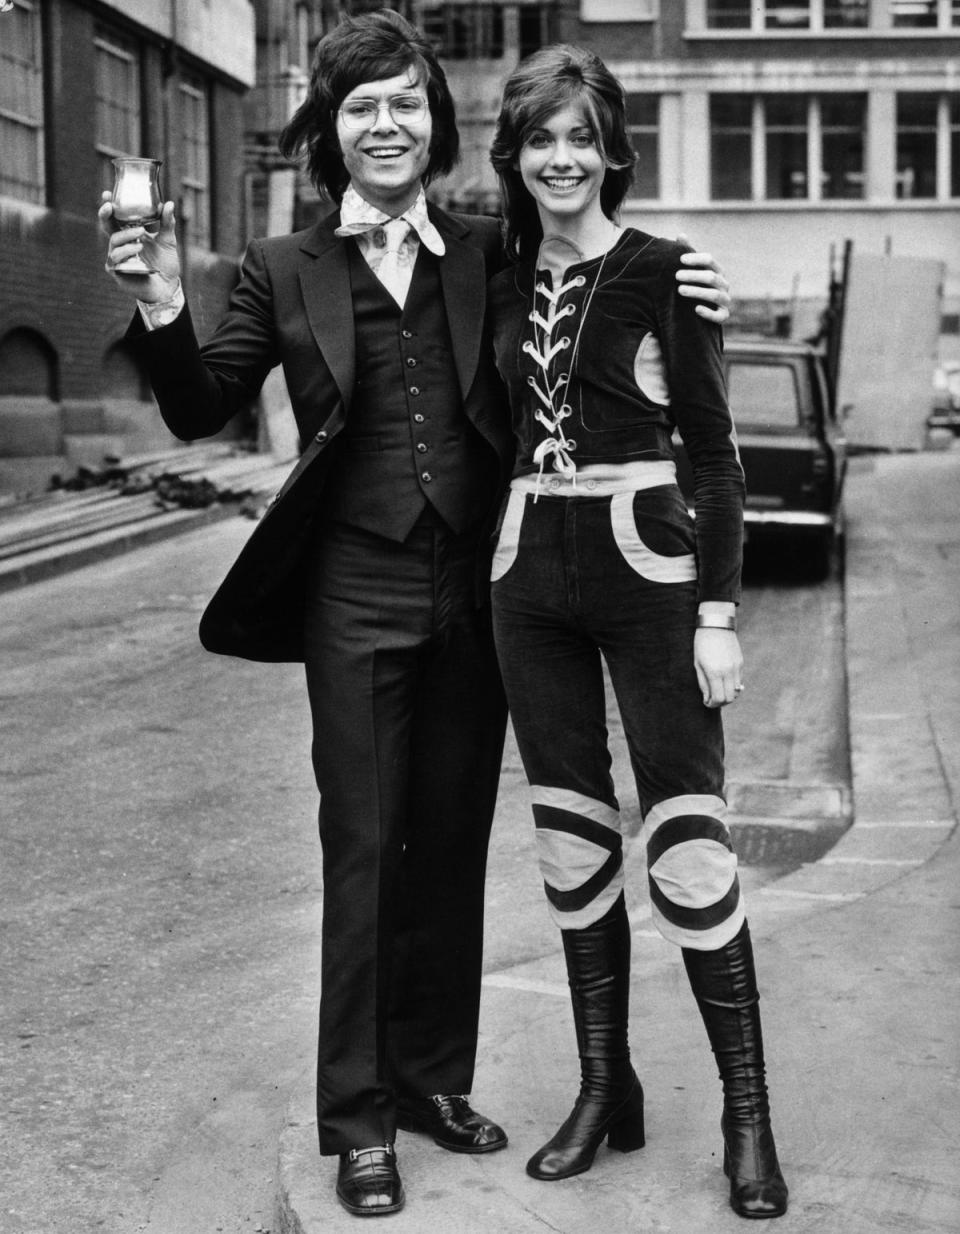 Sir Cliff Richard and Olivia Newton-John pictured in 1971, the year that they first met (Getty Images)